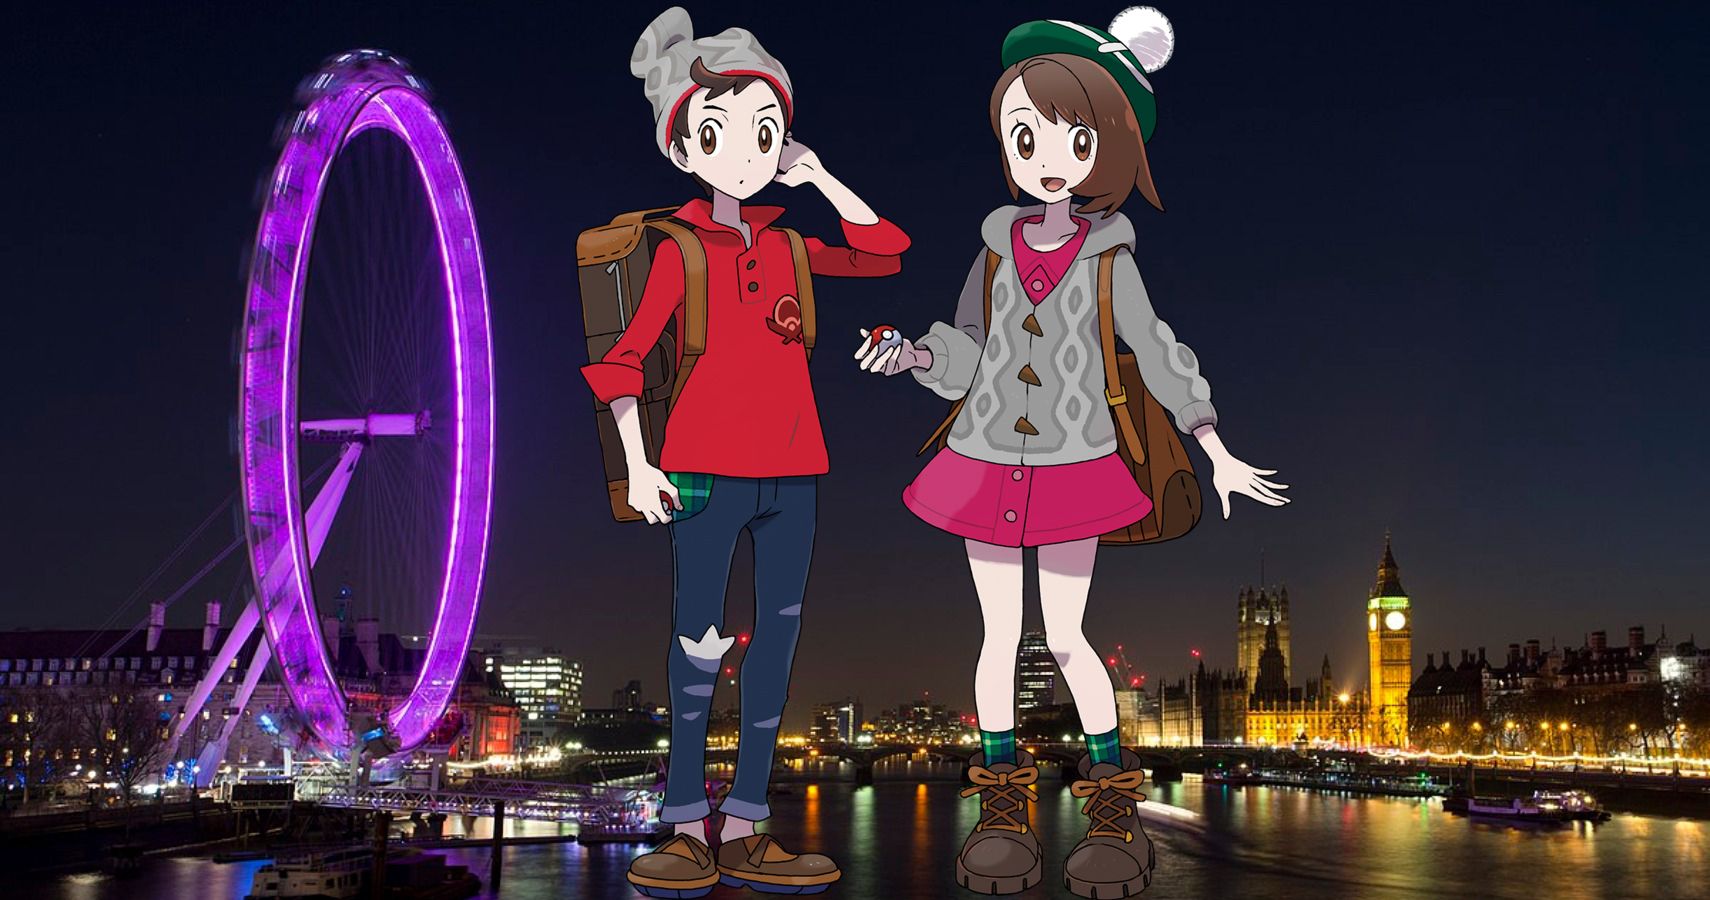 These Are The Uk Cities That Inspired The Galar Region In